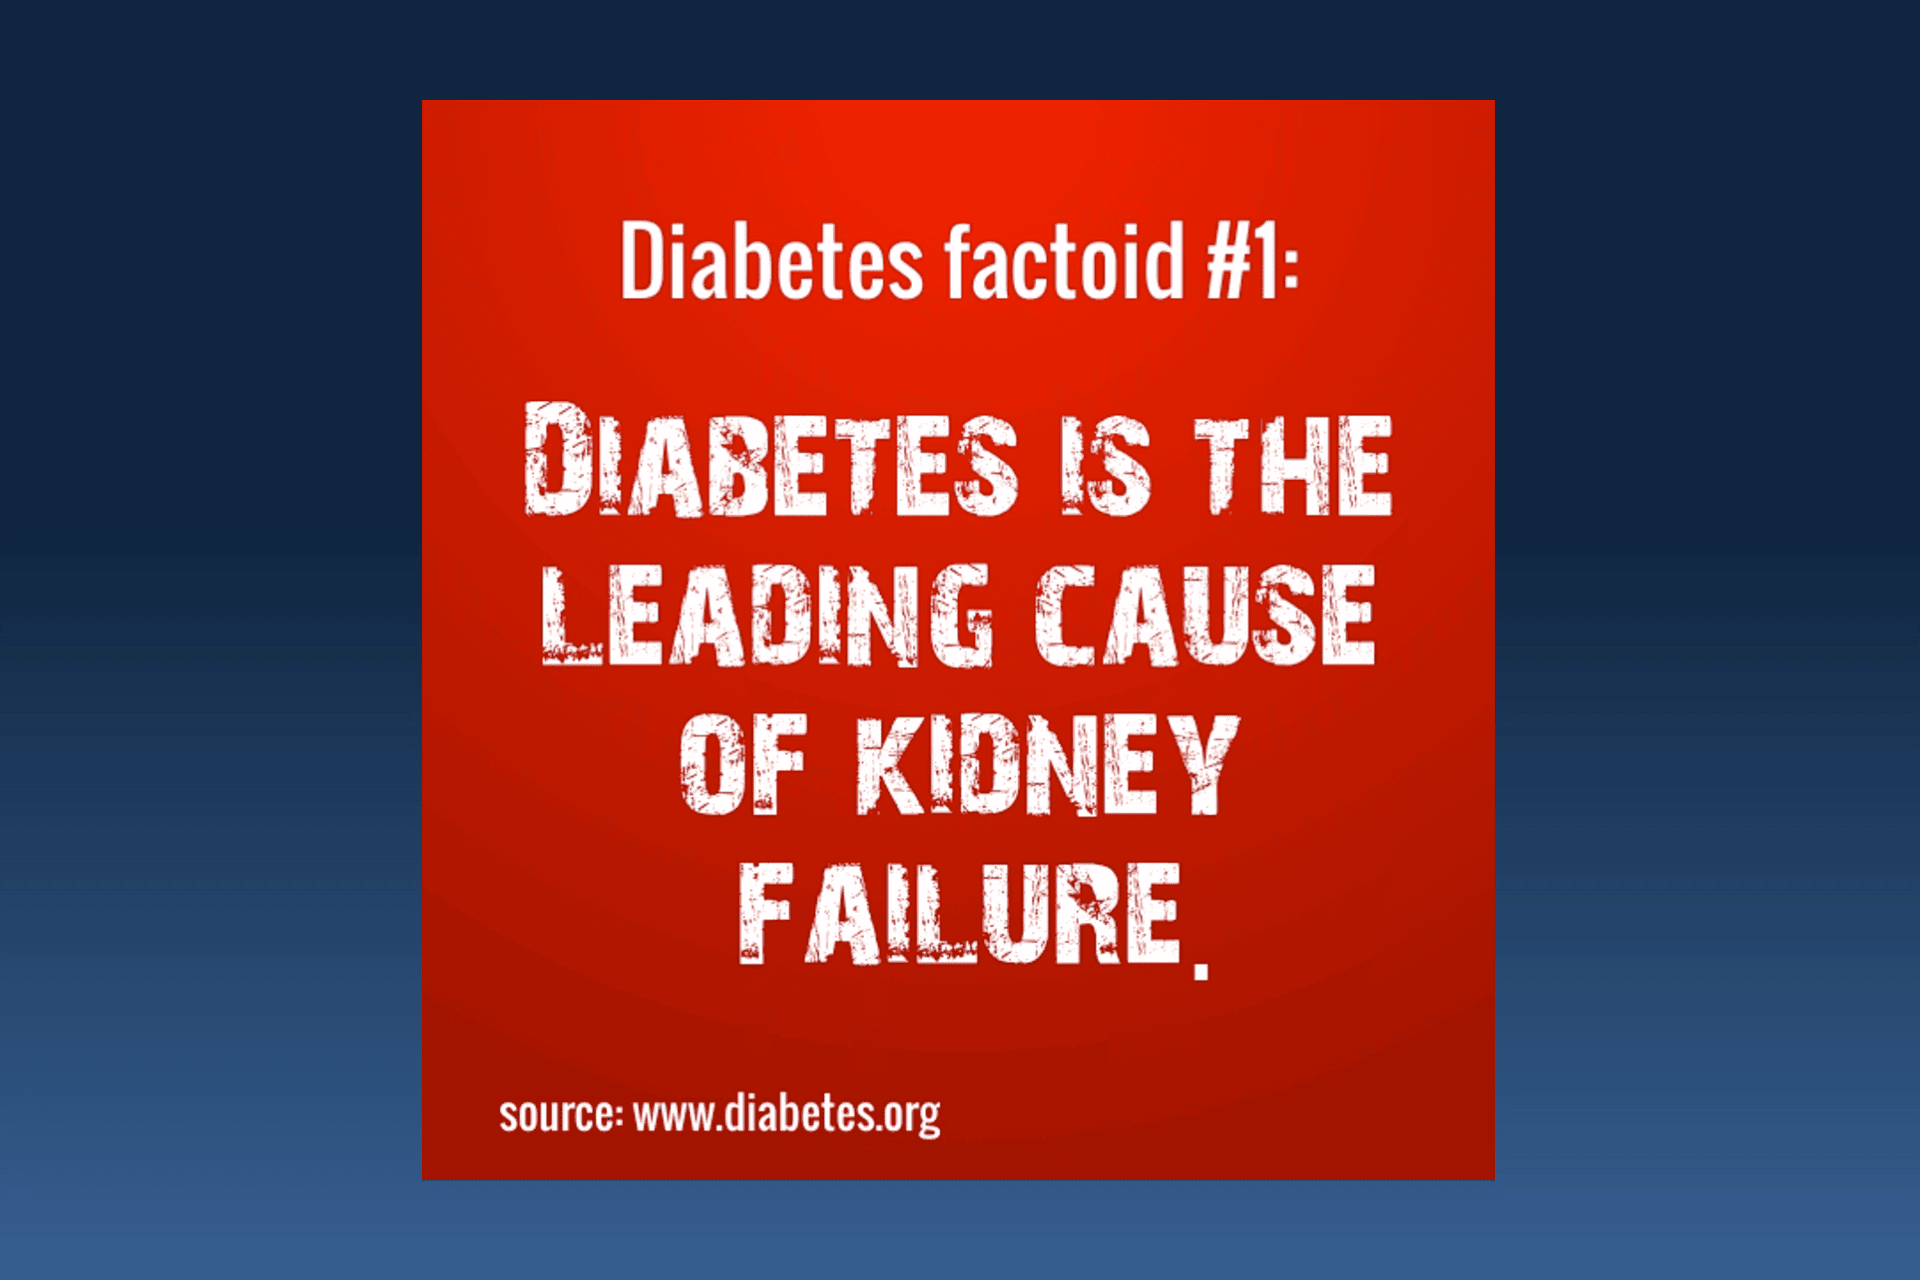 Image saying that diabetes is the leading cause of kidney failure